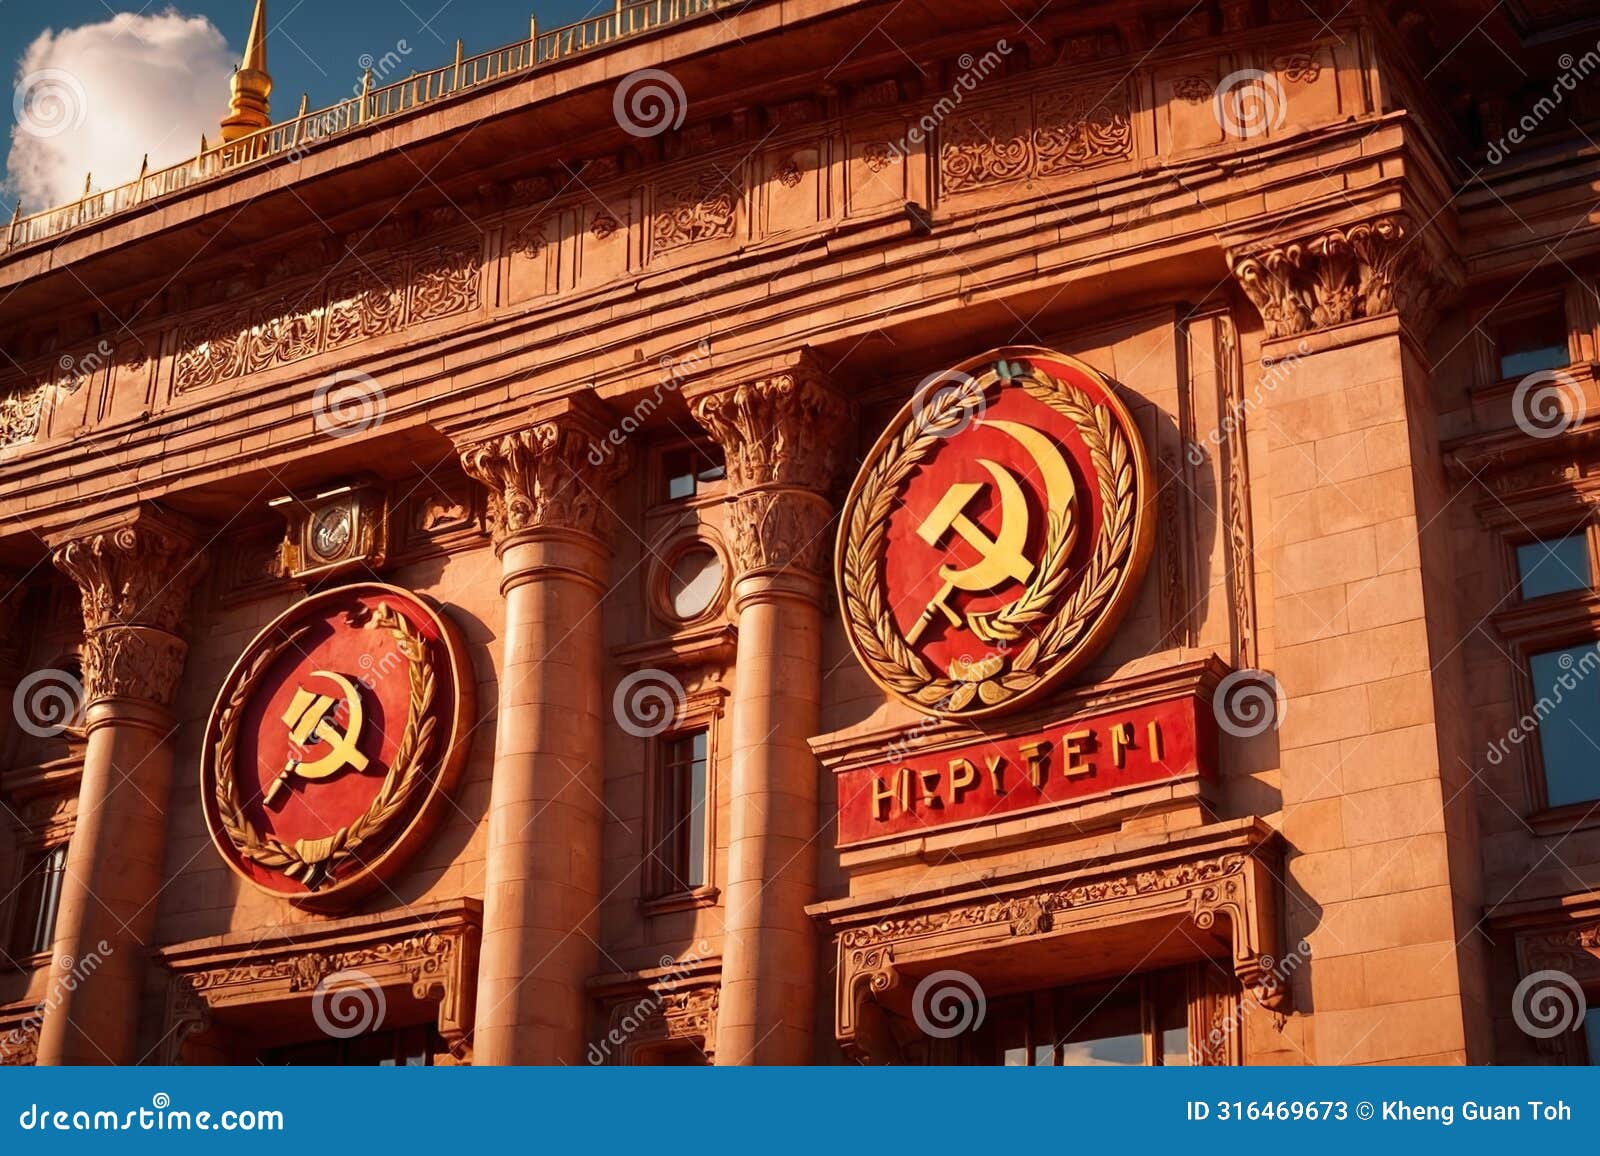 soviet style authoritarian totalitarian building, with communist s